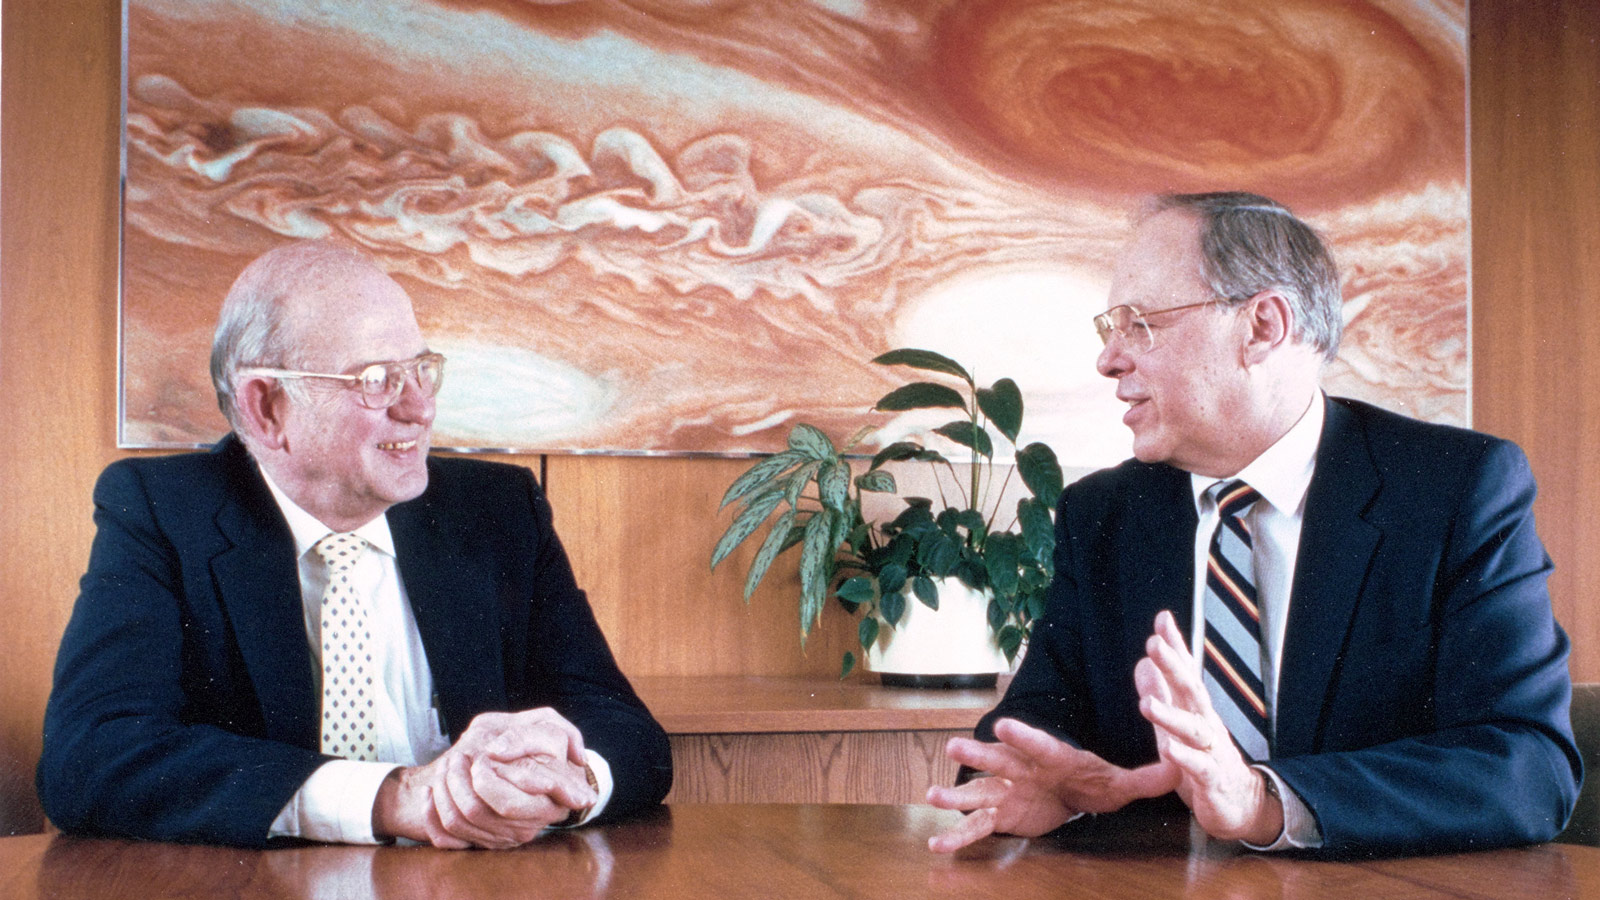 In this 1988 photo, JPL Director Dr. Lew Allen (left) and his Deputy Director Dr. Peter Lyman